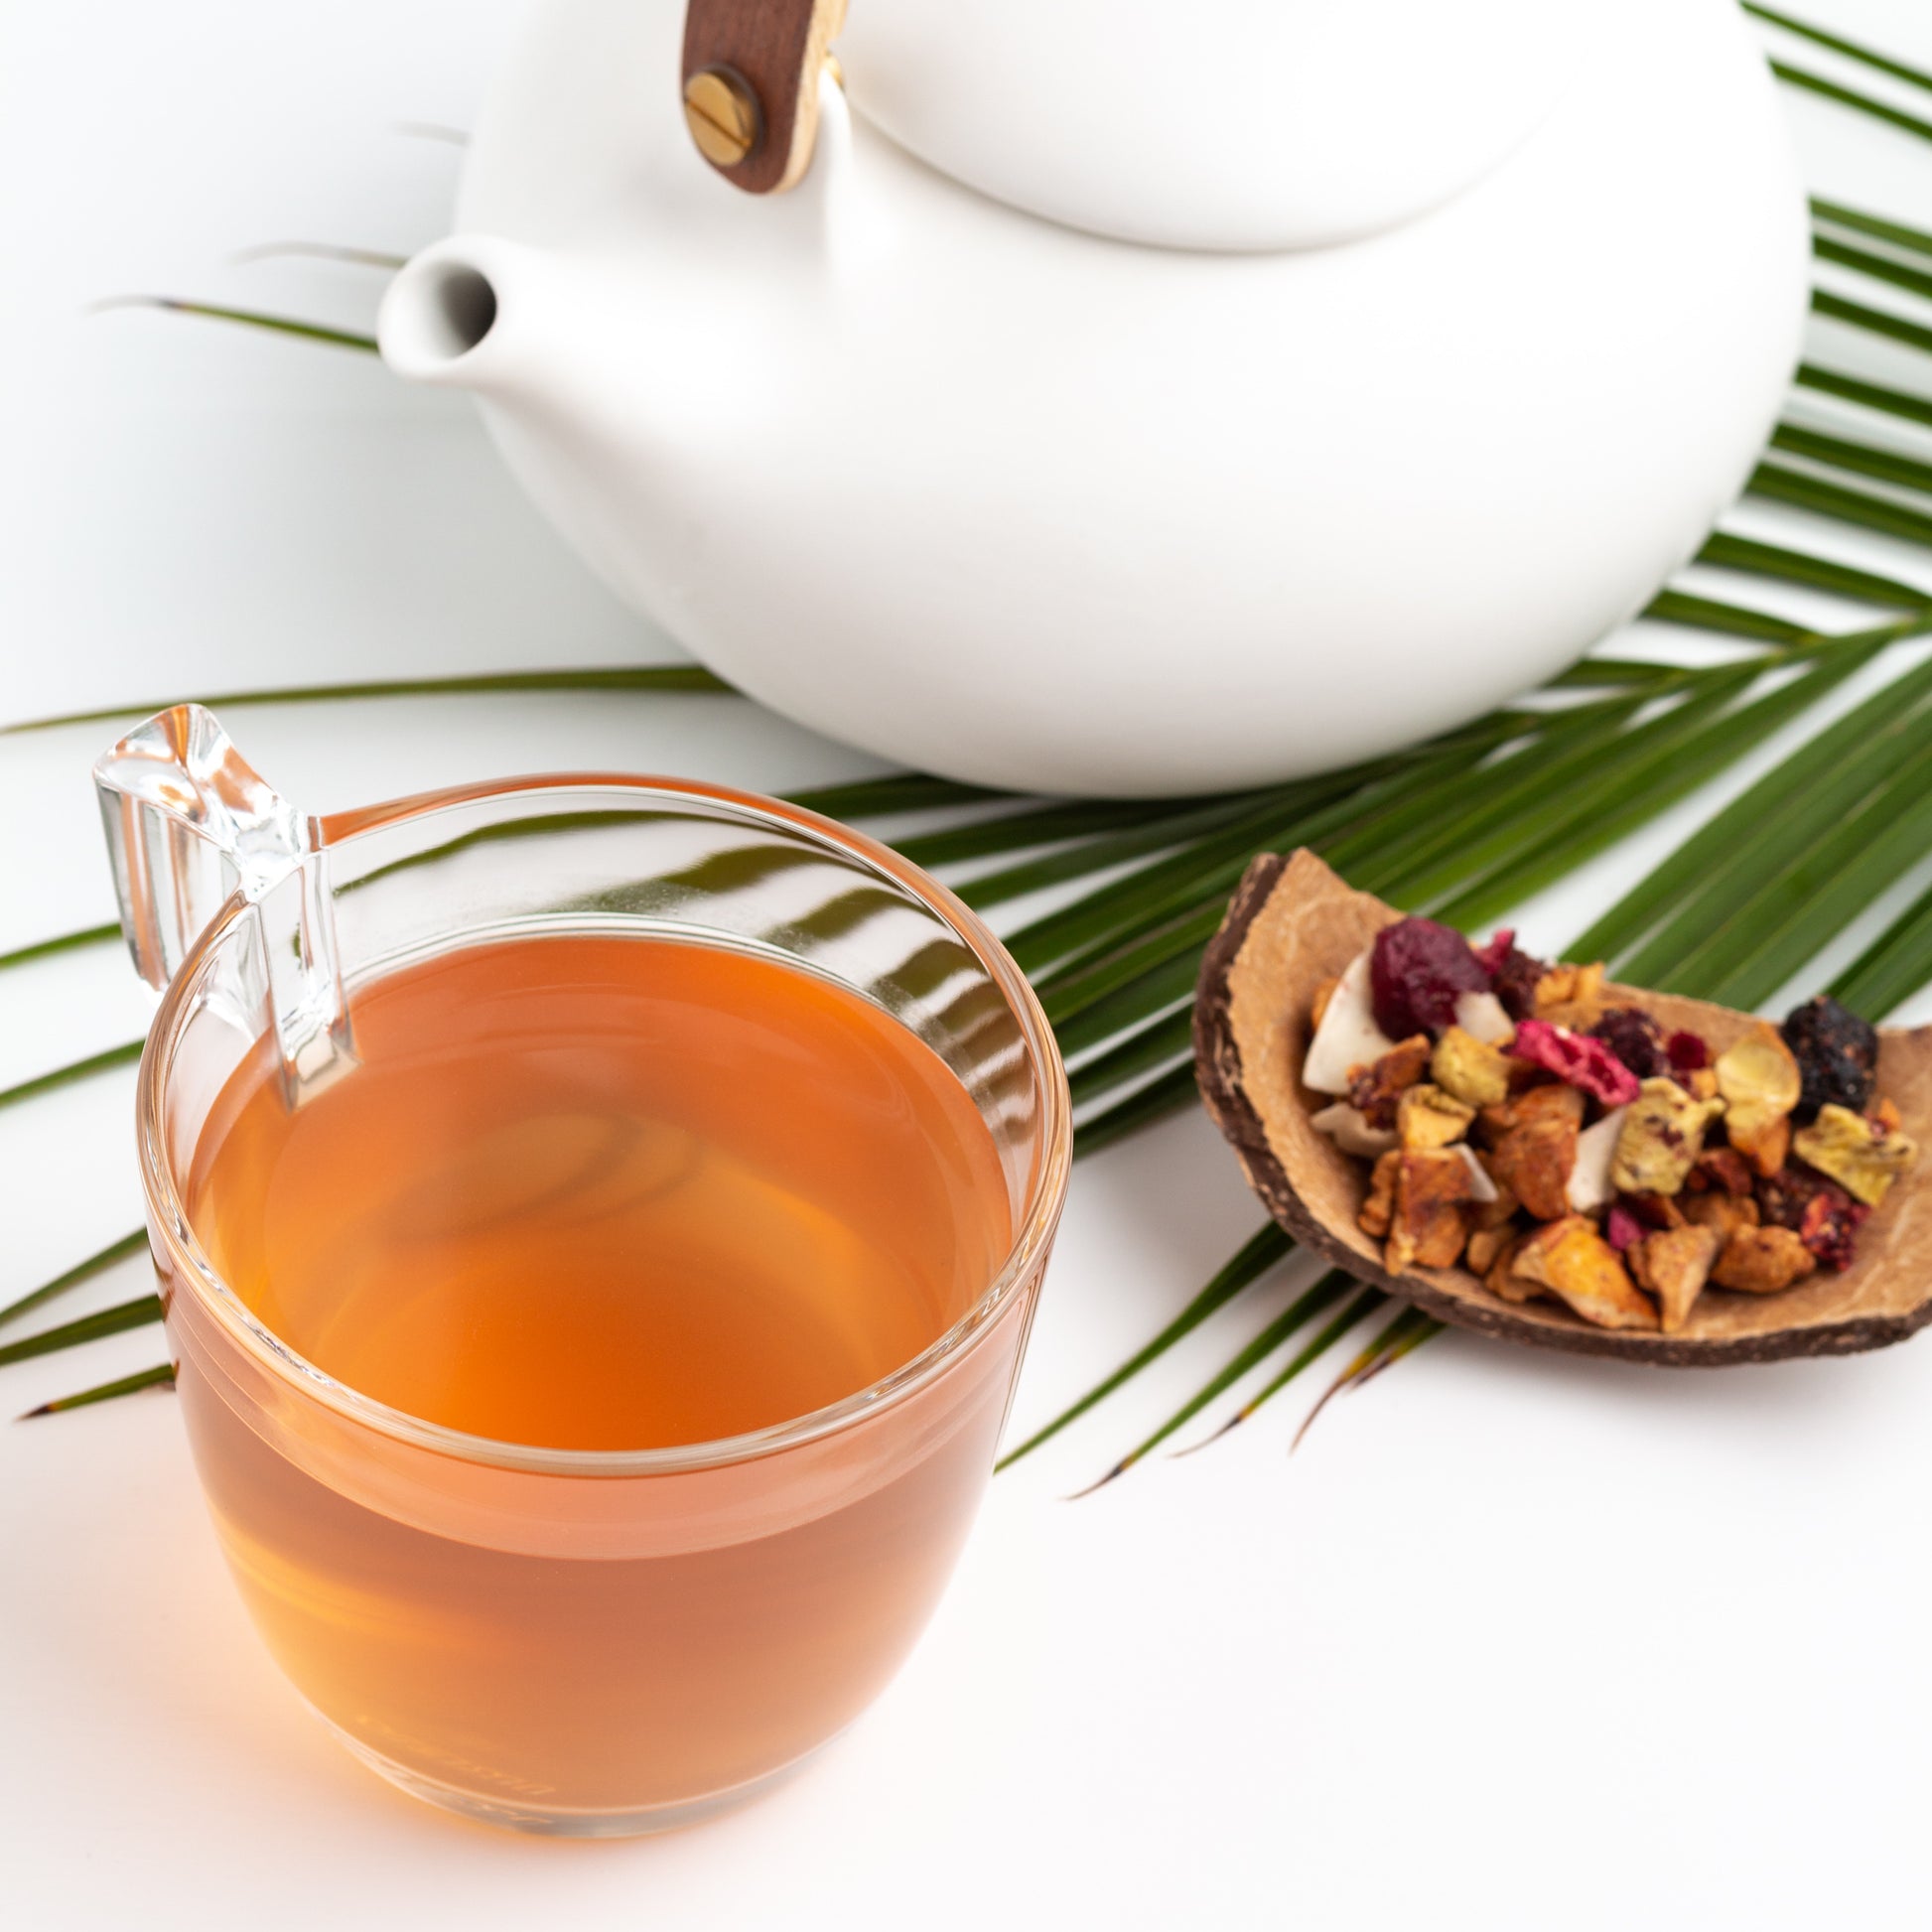 Pacific Paradise Herbal Tea shown brewed in a glass mug, with a white teapot, a green palm frond, and a coconut shell with loose tea displayed nearby